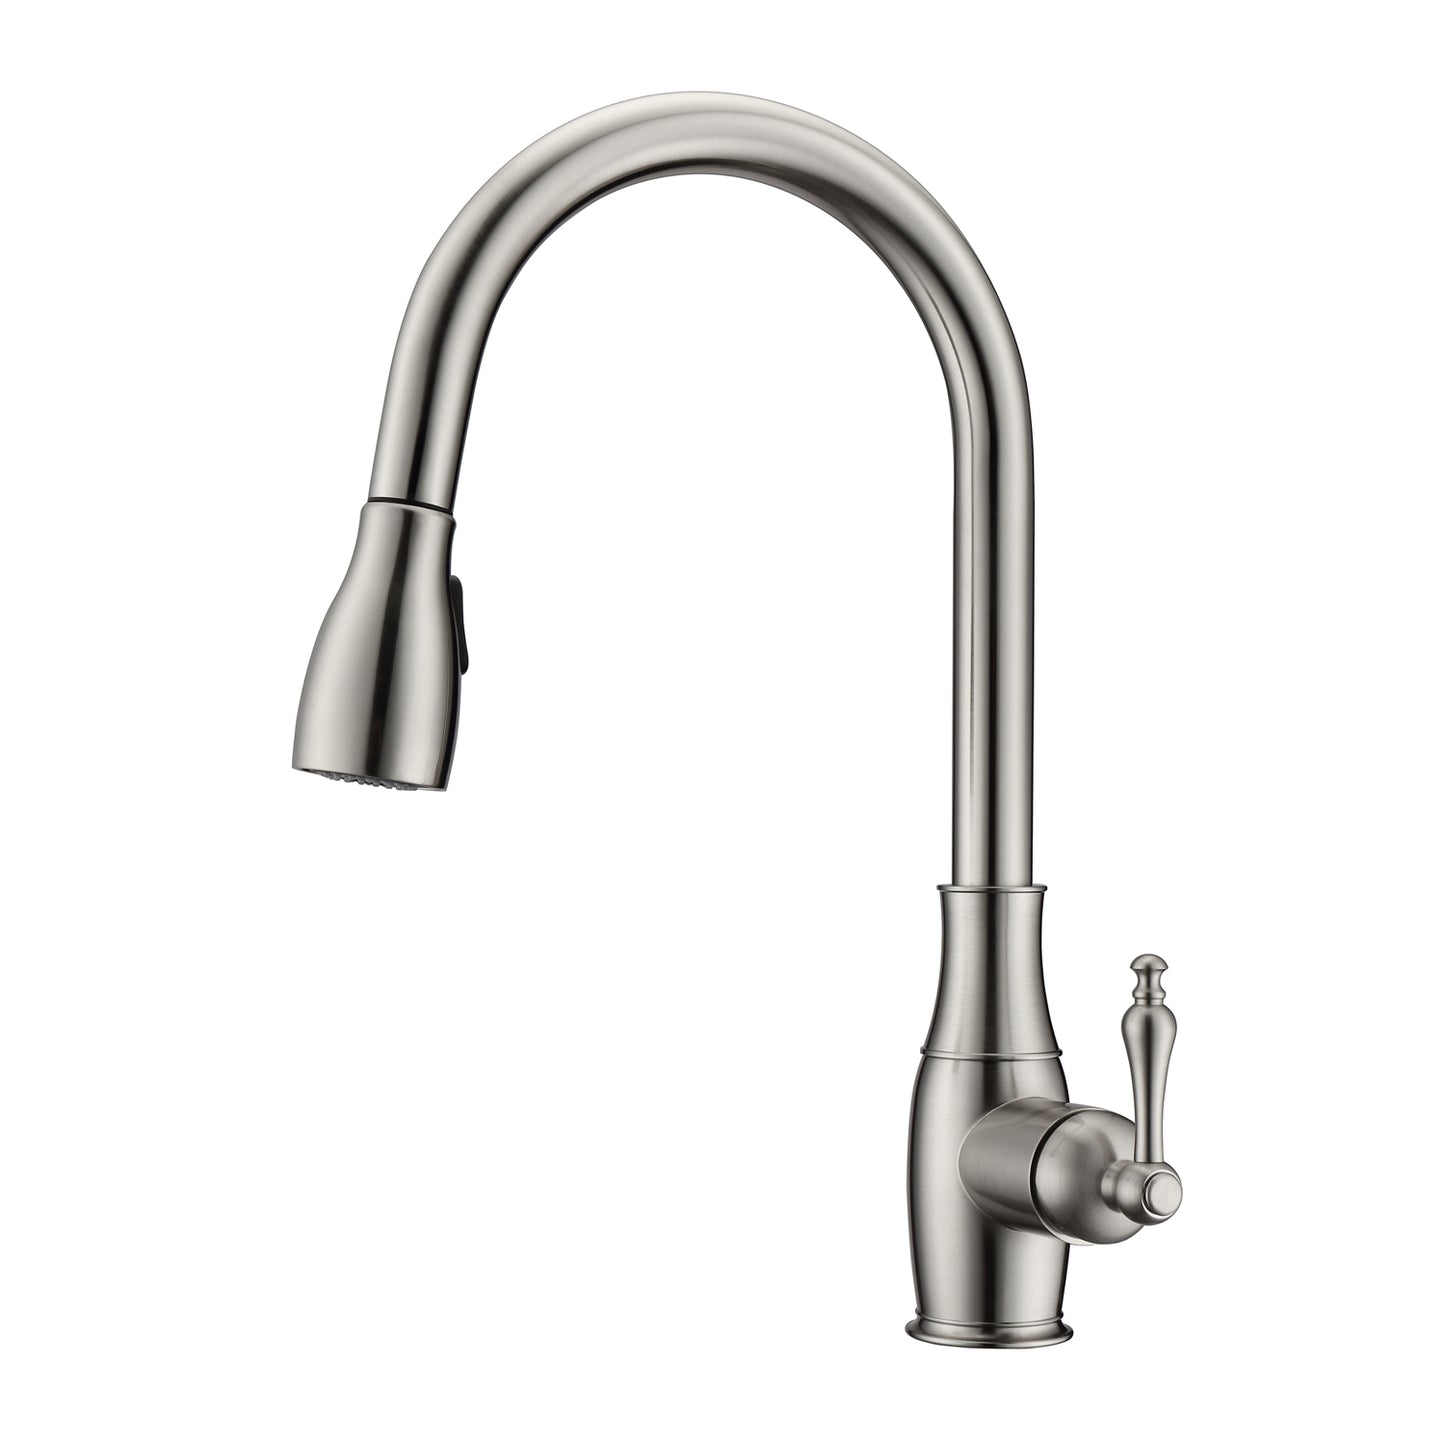 Cullen 1 Kitchen Faucet, Pull-Out Sprayer, Single Lever Handle, Brushed Nickel